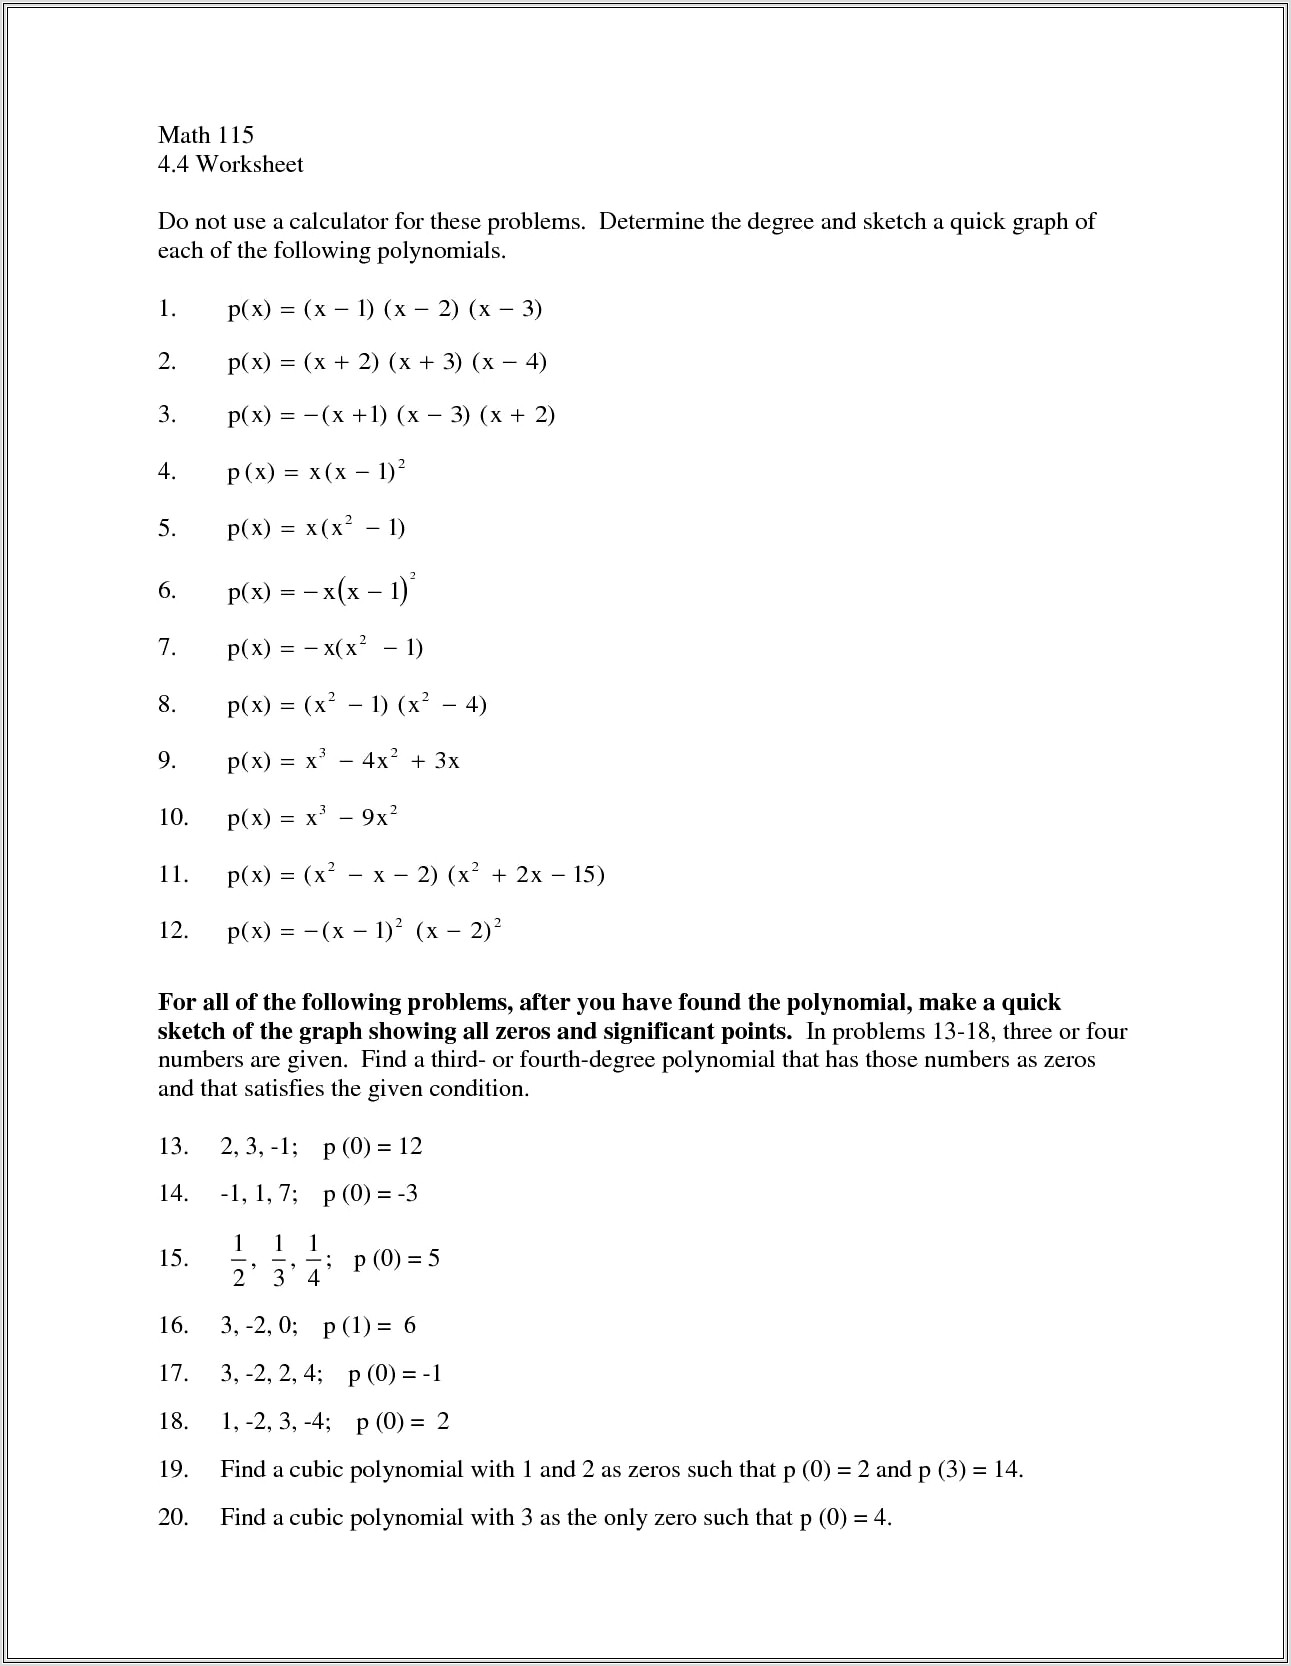 Multiplying Polynomials Worksheet With Answers